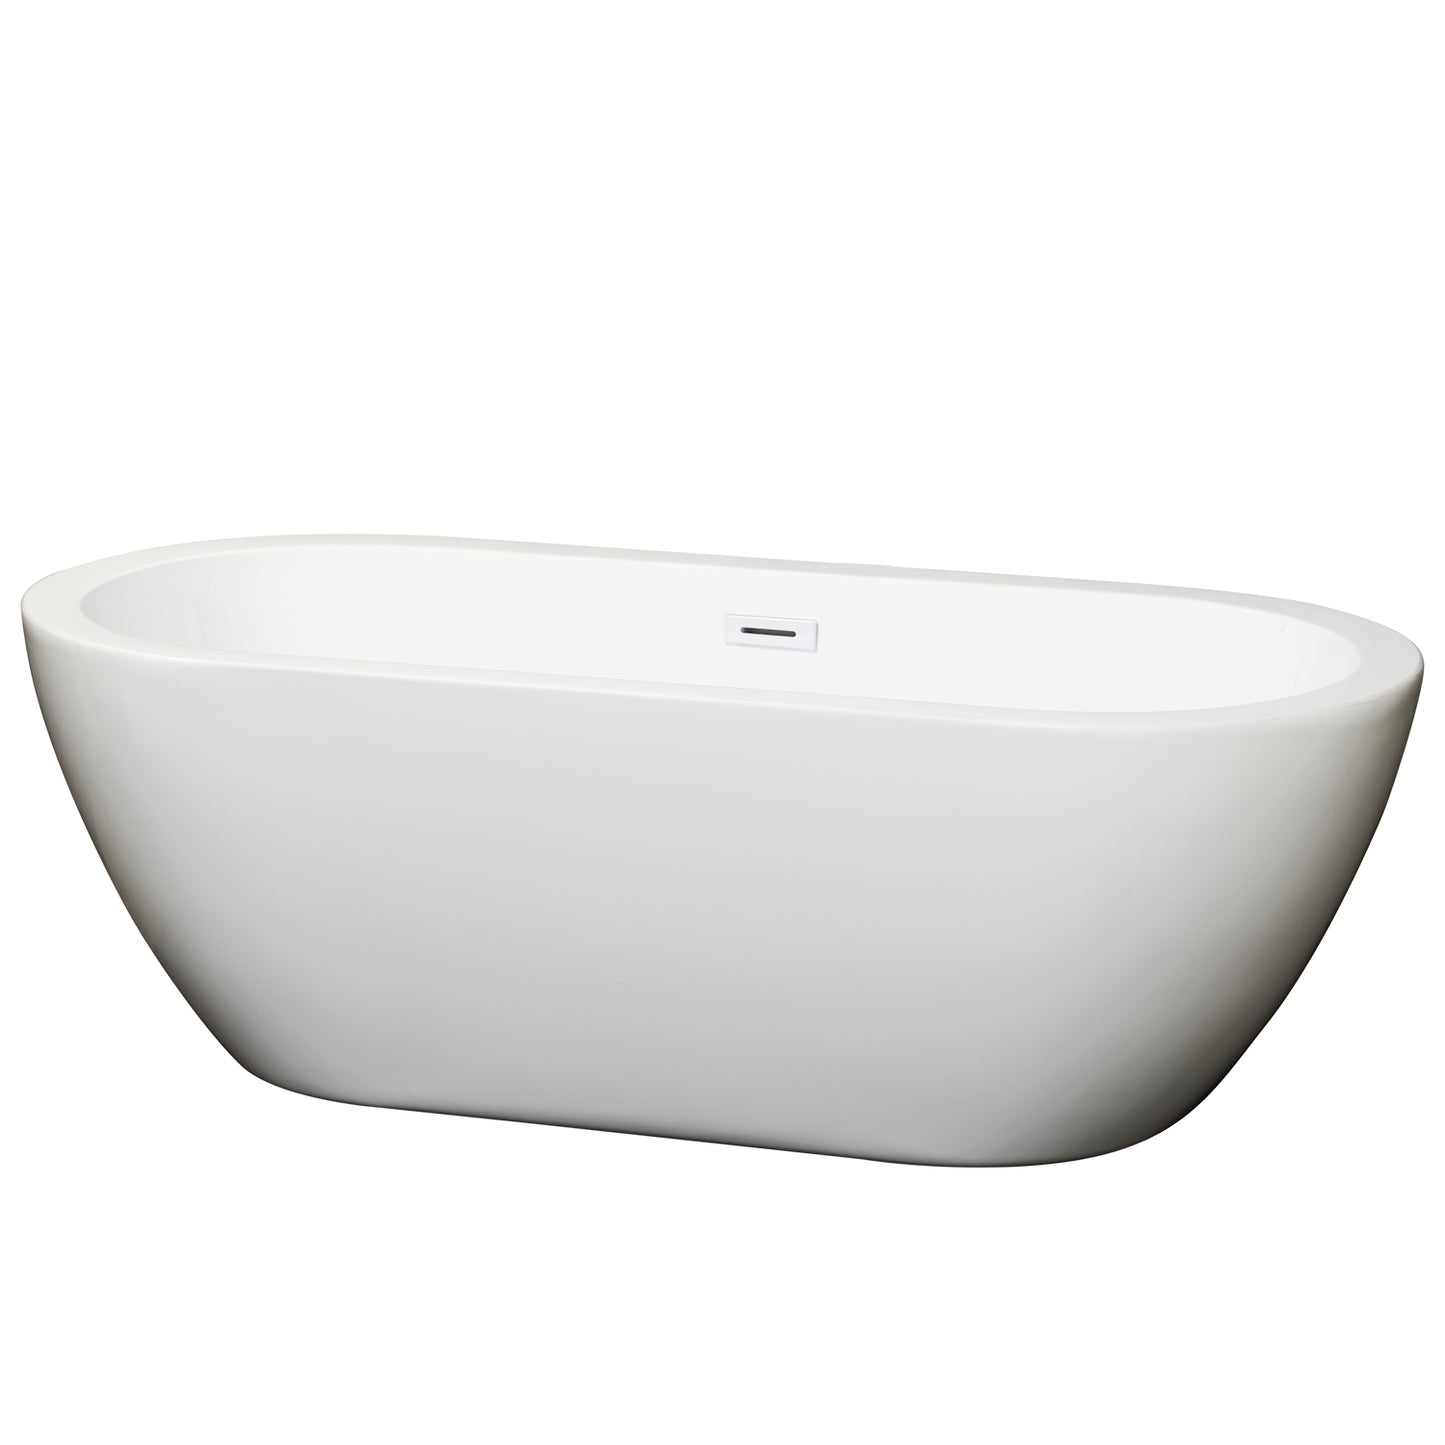 Wyndham Collection Soho 68 Inch Freestanding Bathtub in White with Shiny White Drain and Overflow Trim - Luxe Bathroom Vanities